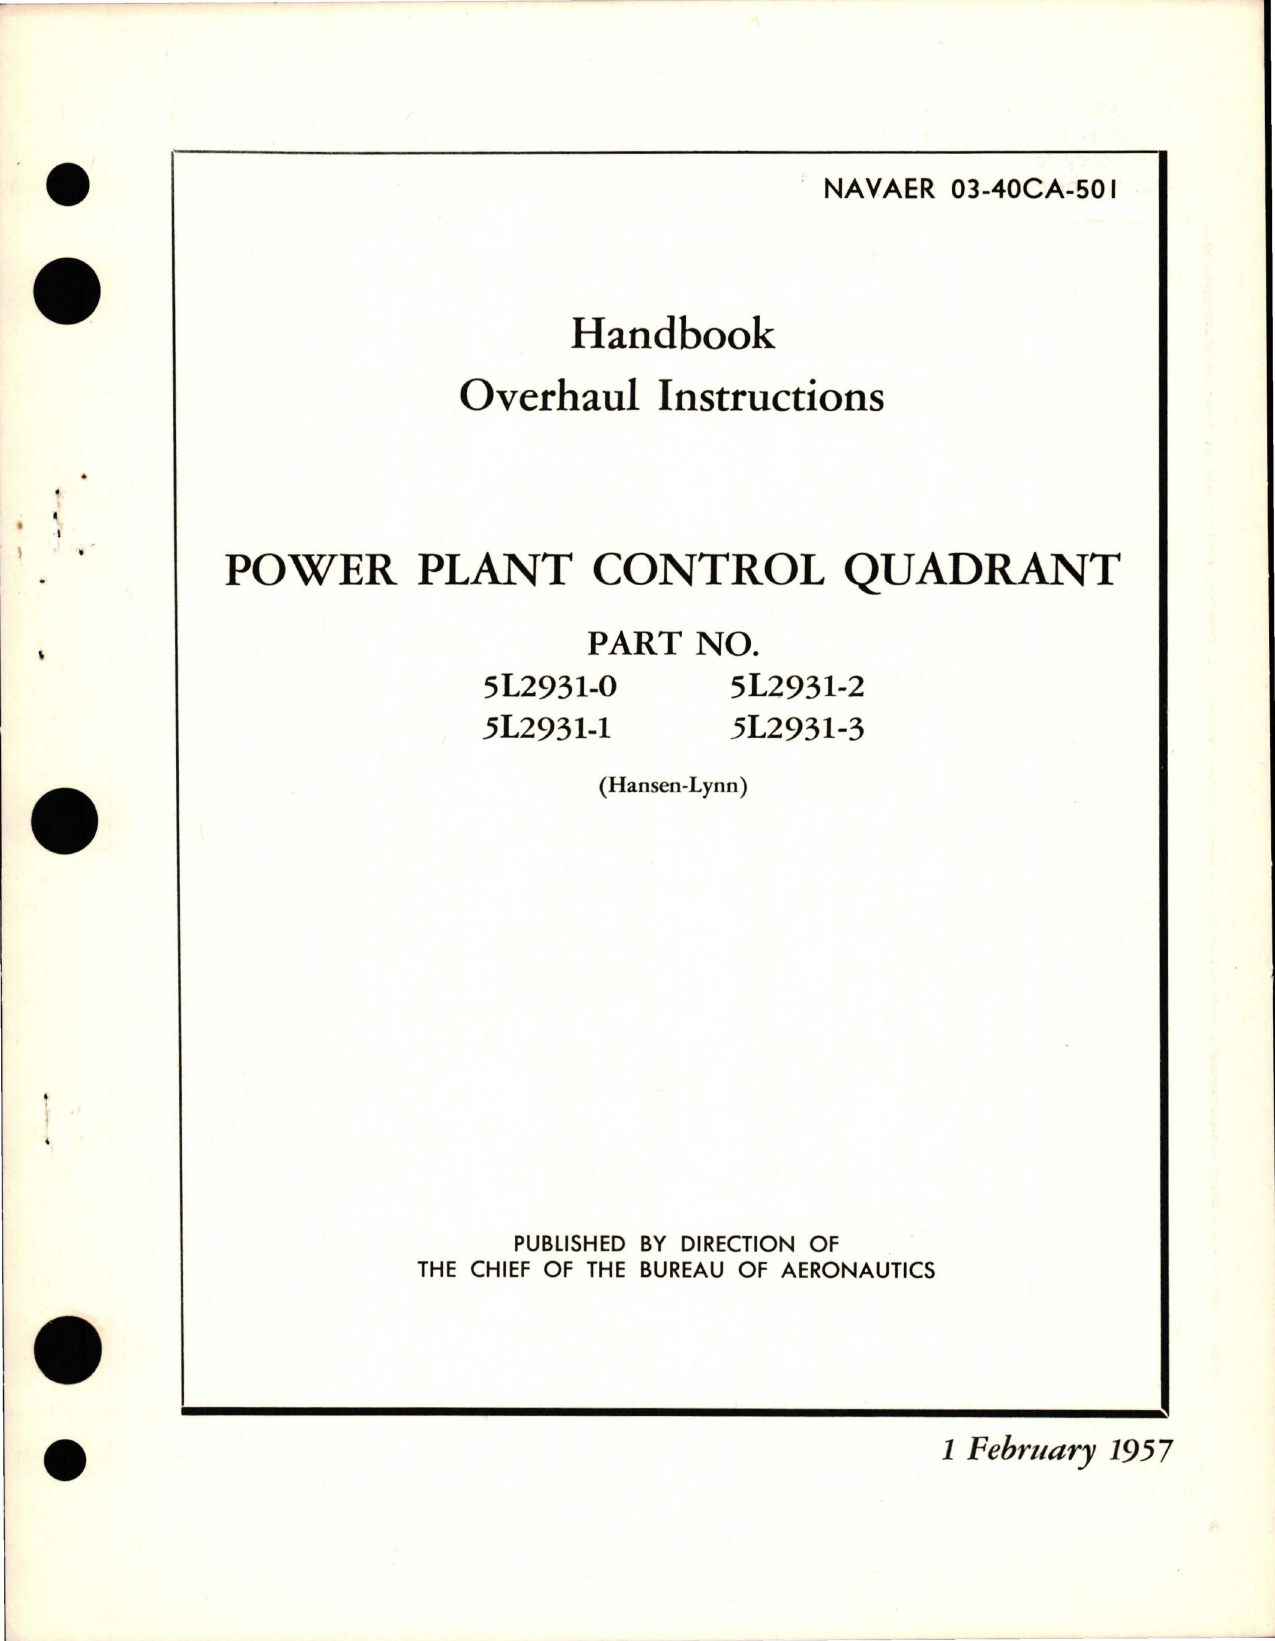 Sample page 1 from AirCorps Library document: Overhaul Instructions for Power Plant Control Quadrant - Parts 5L2931-0, 5L2931-1, 5L2931-2, and 5L2931-3